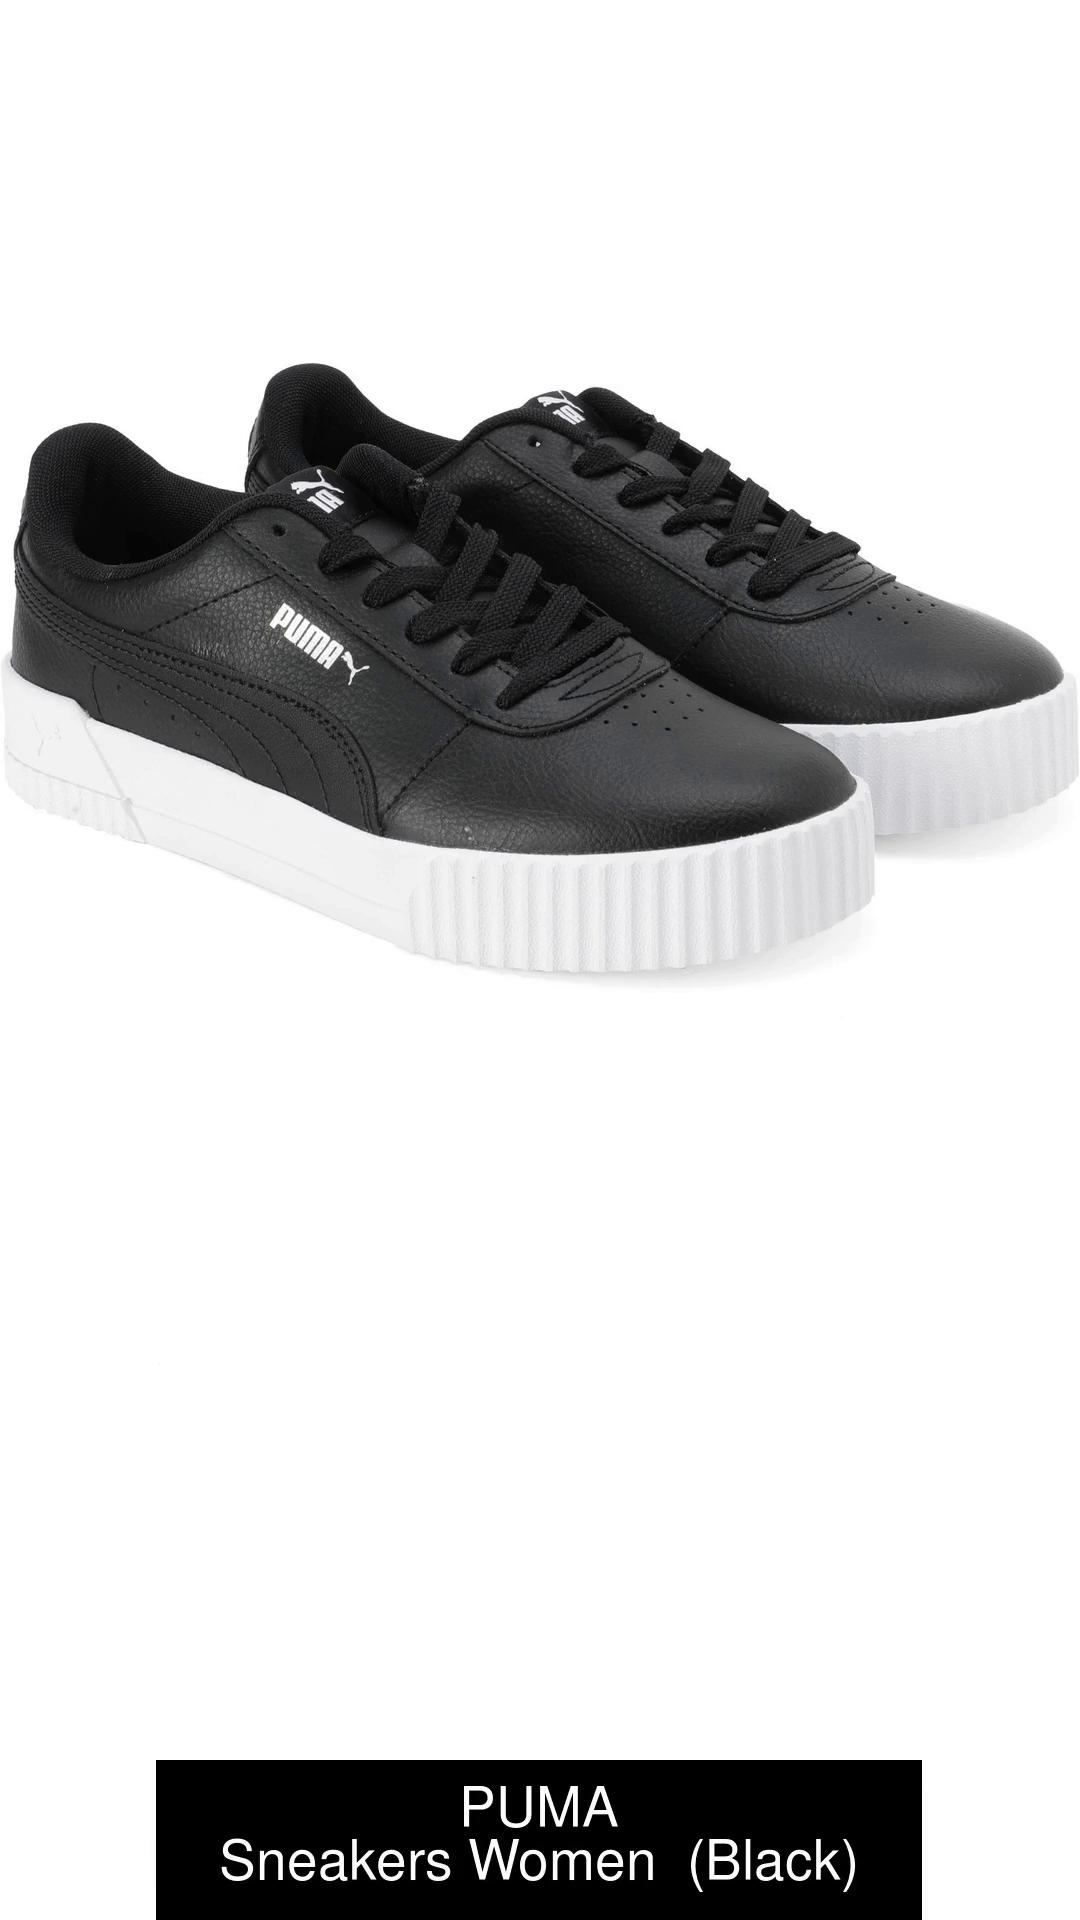 PUMA Carina L Sneakers For Women - Buy PUMA Carina L Sneakers For Women  Online at Best Price - Shop Online for Footwears in India | 